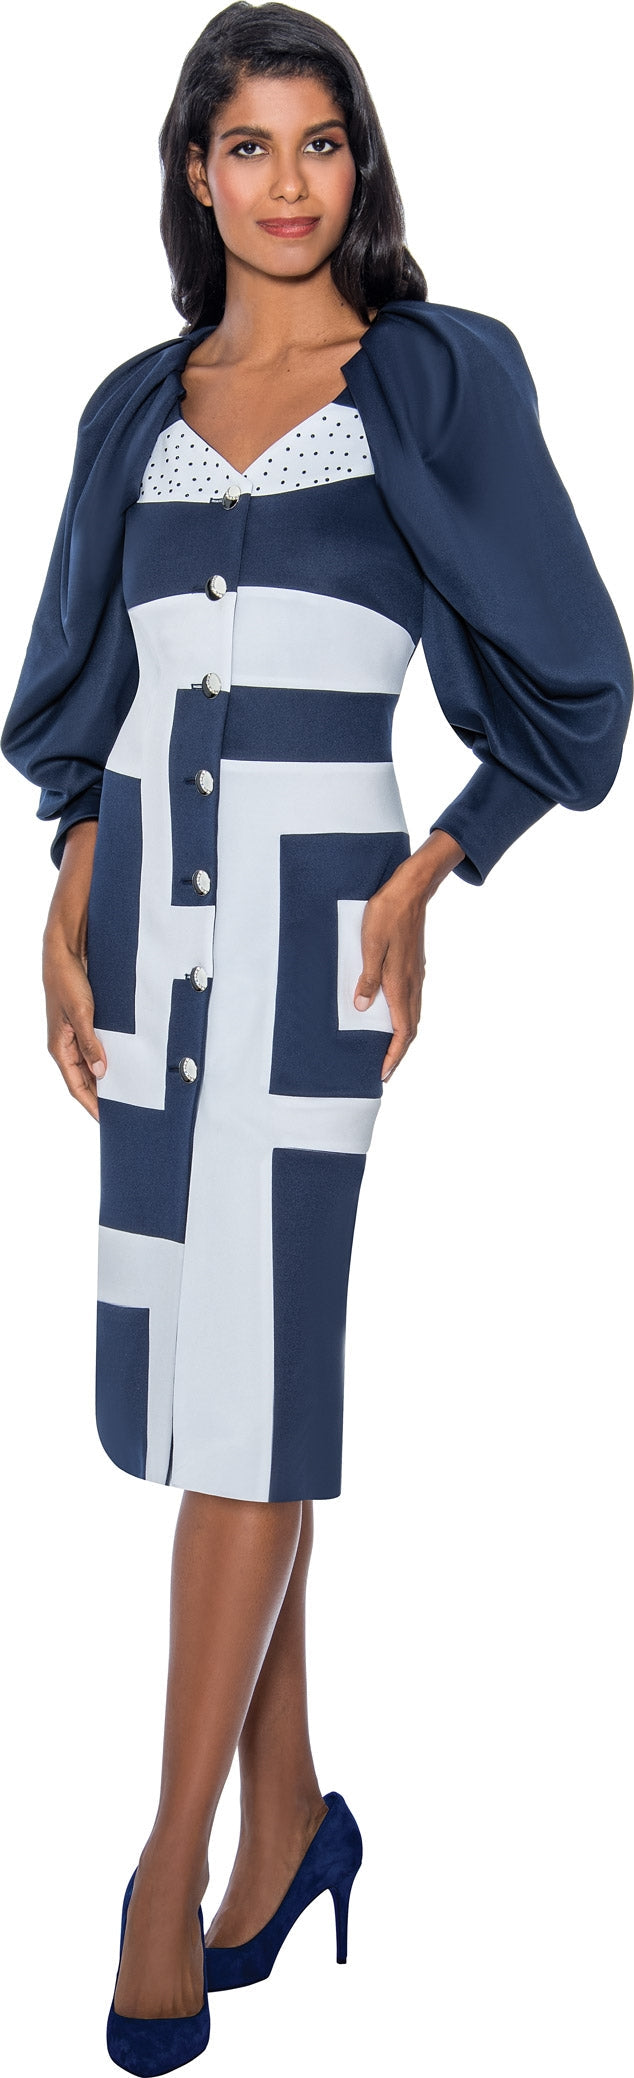 Church Dress By Nubiano 891-Navy/White - Church Suits For Less